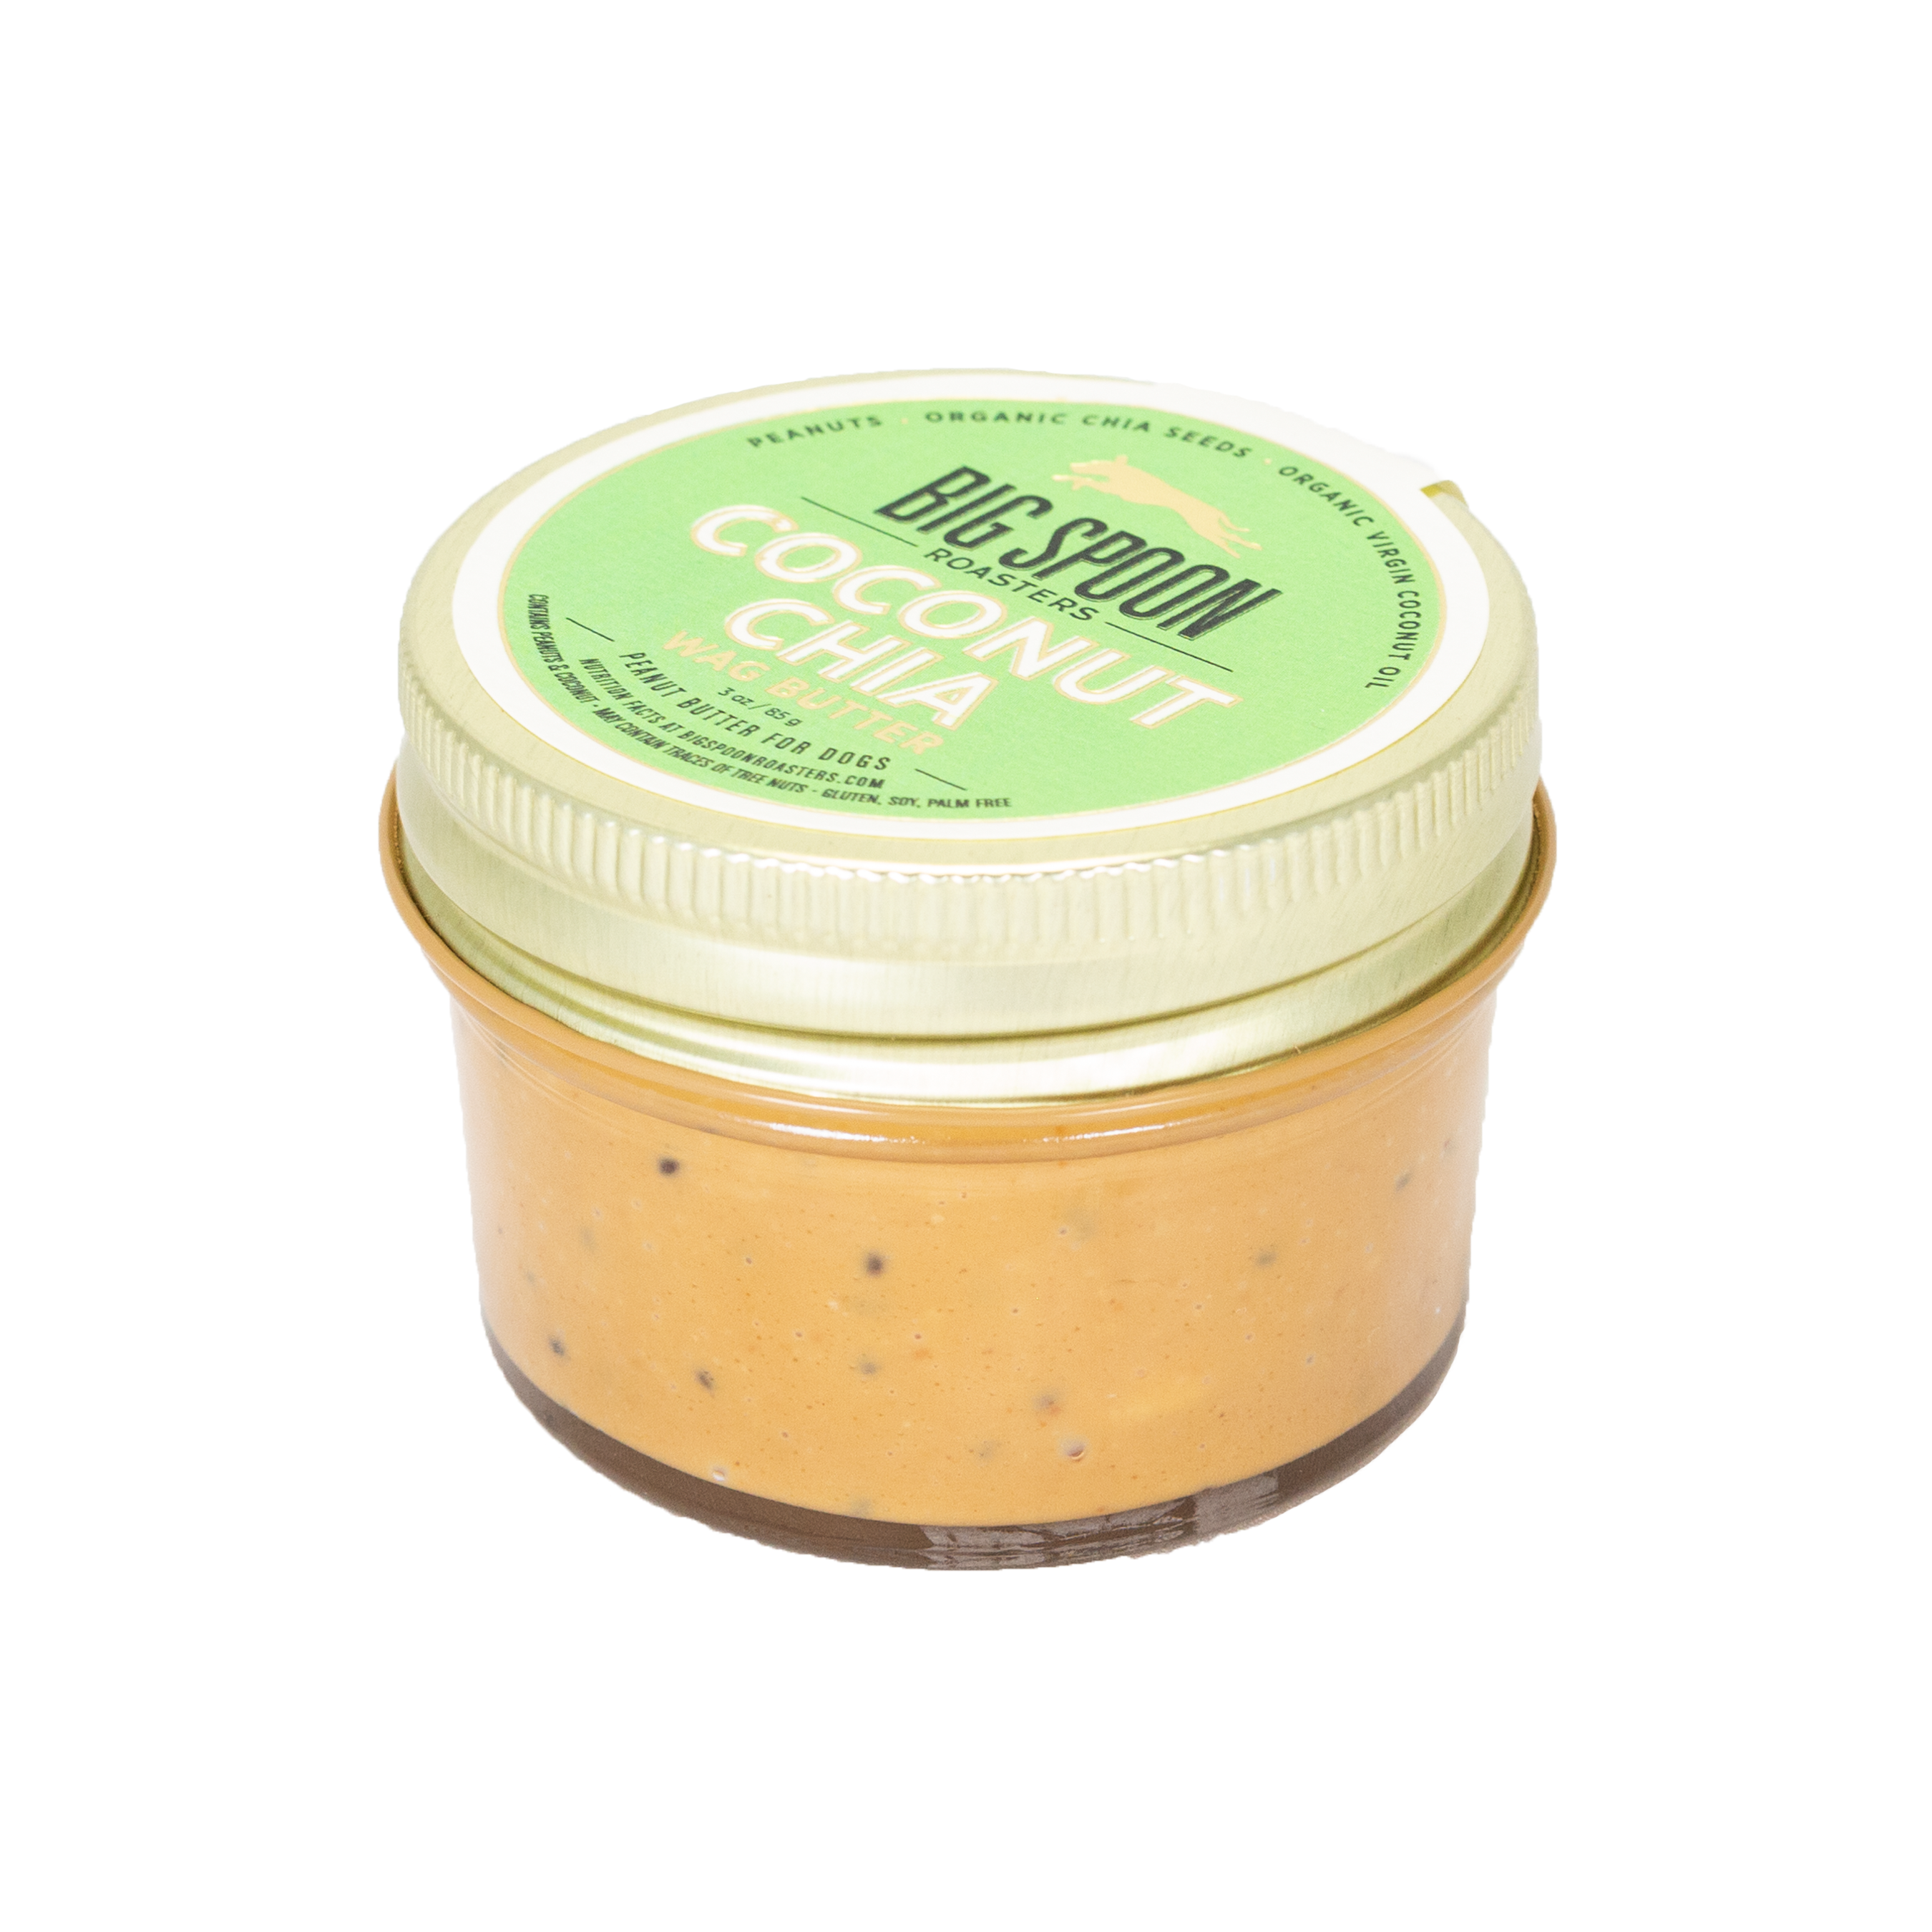 Coconut Chia Wag Butter For Dogs